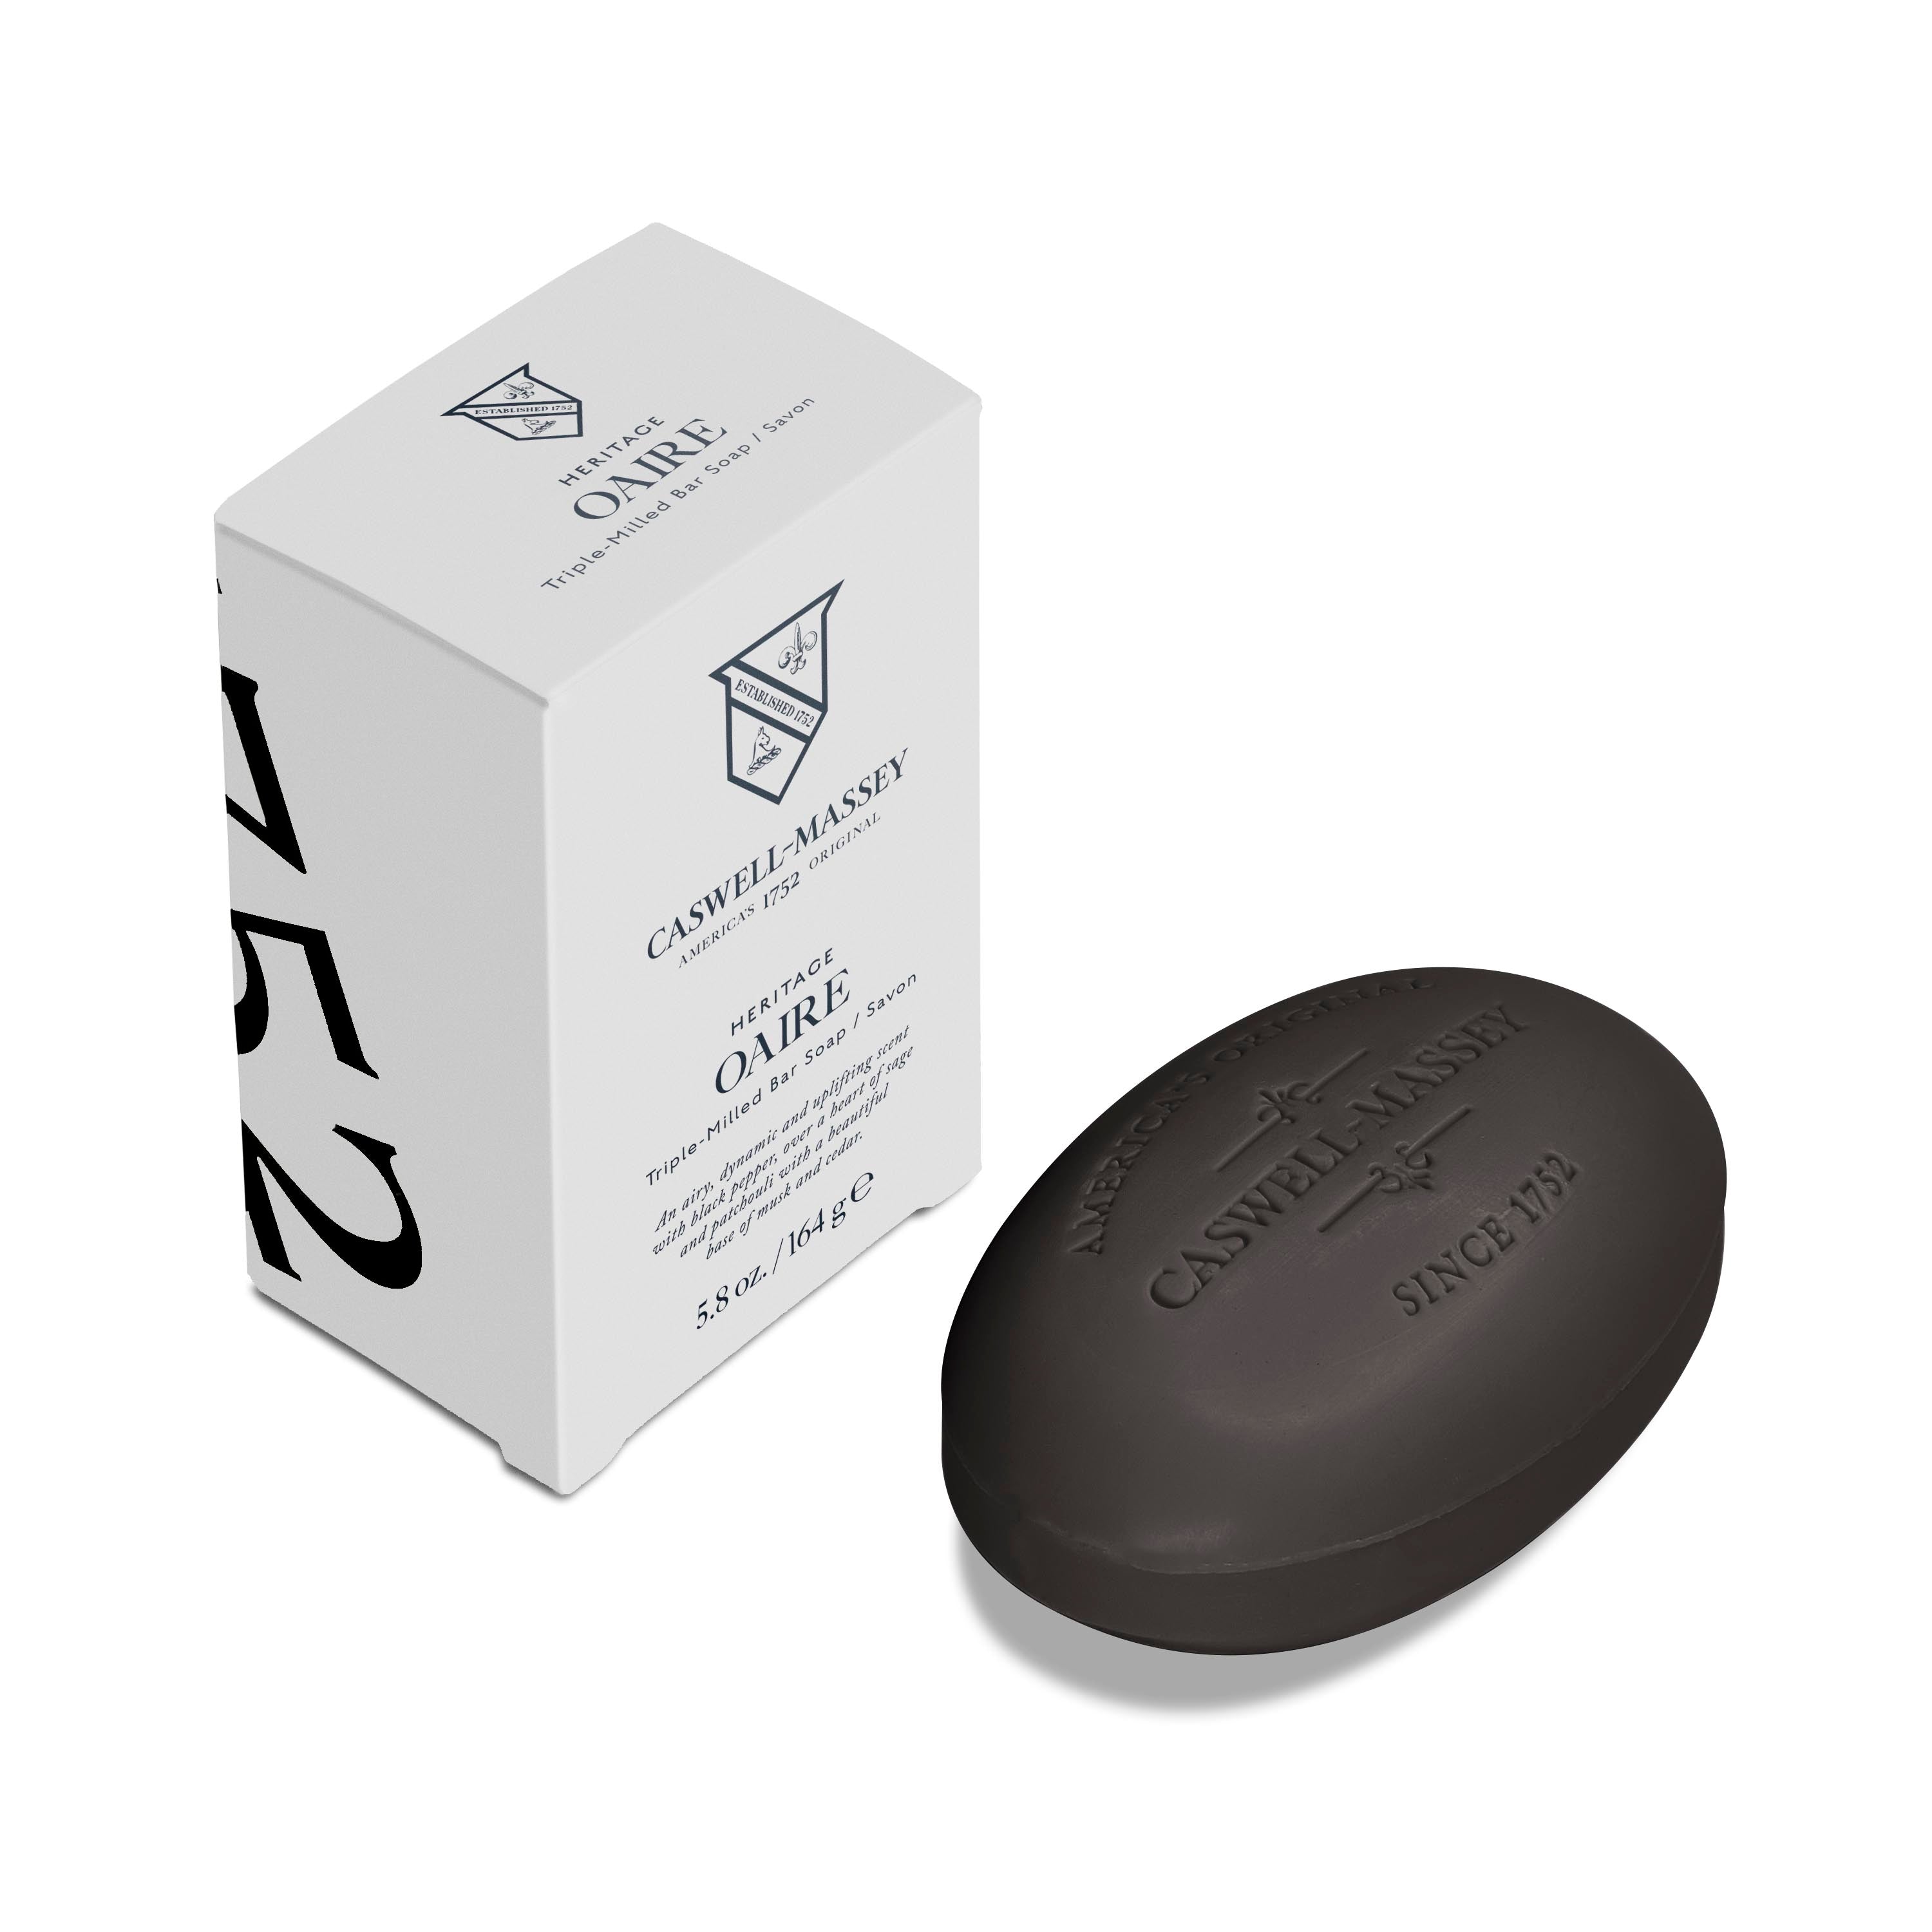 Caswell-Massey: OAIRE Black Clay Bar Soap shown as oval luxury bath soap sitting next to outer packaging of grey box